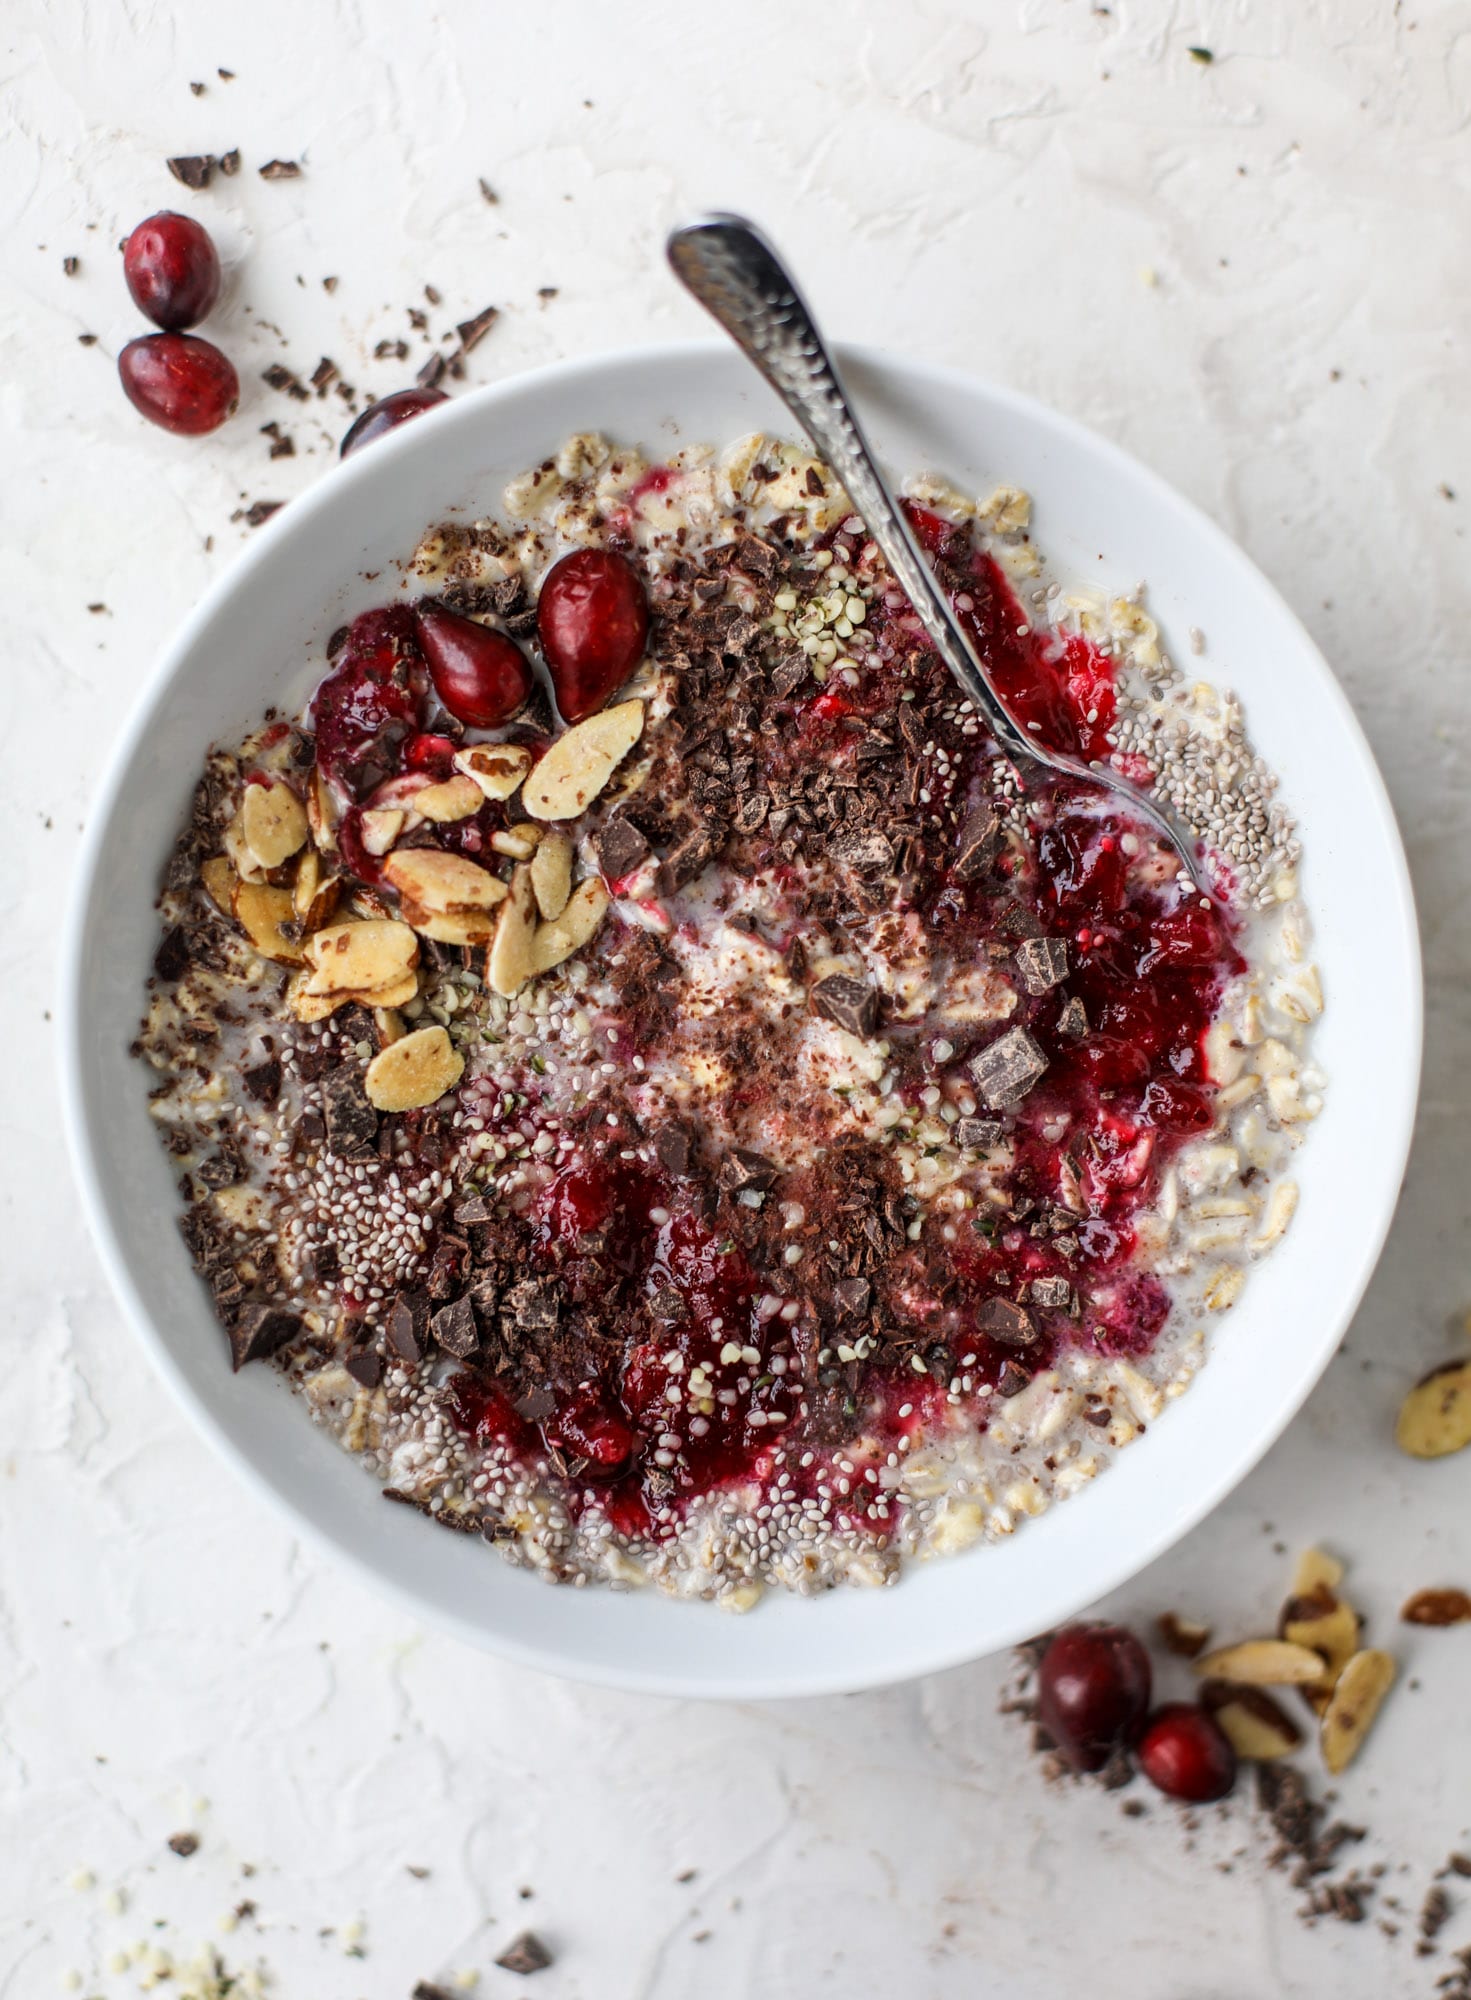 These leftover cranberry overnight oats are the perfect post-Thanksgiving breakfast! Leftover cranberry sauce and dark chocolate come together to flavor chewy, chilled overnight oats. Add on sliced almonds, chia seeds and hemp hearts for more deliciousness! I howsweeteats.com #overnight #oats